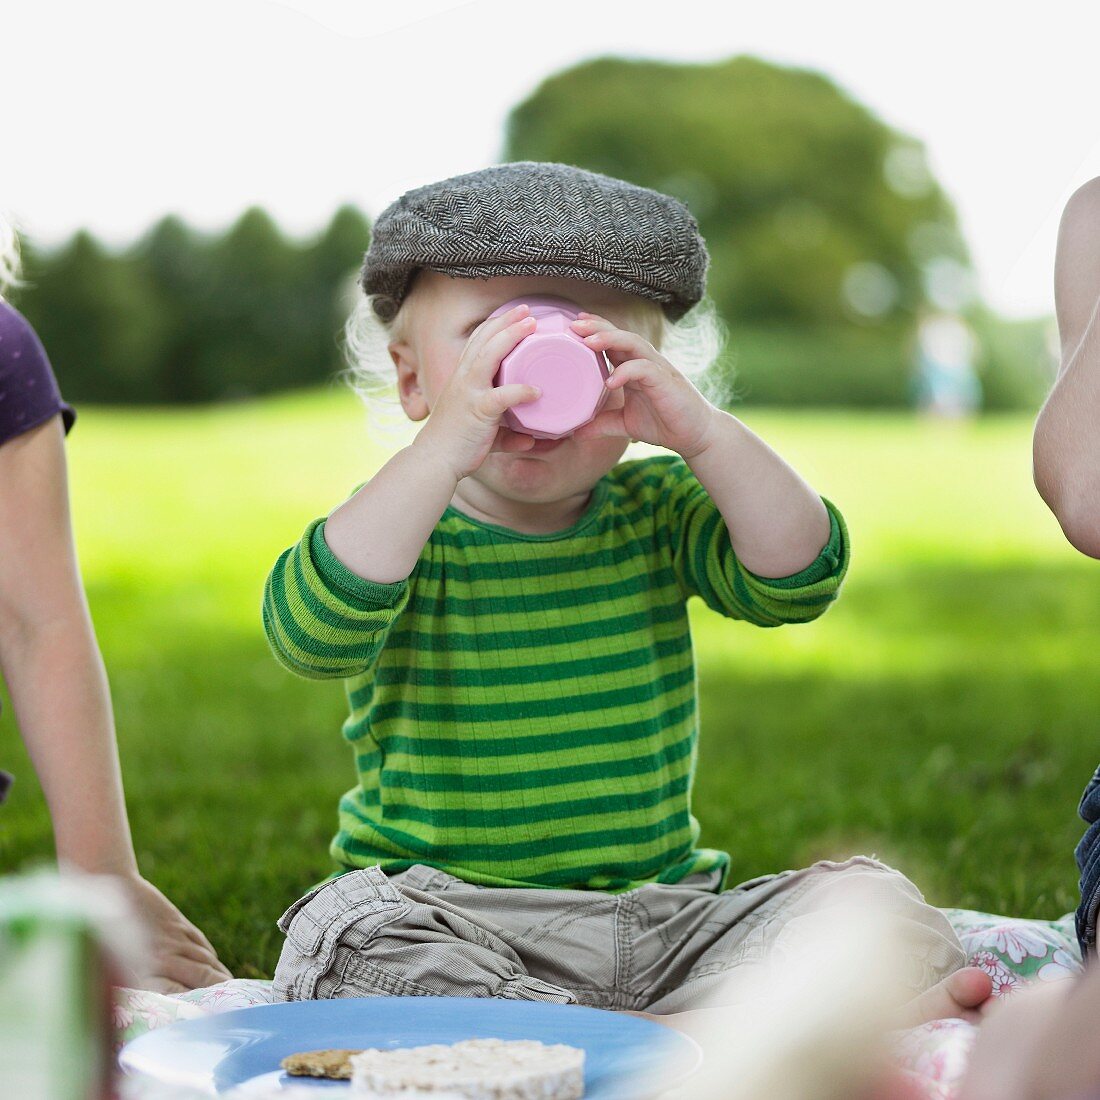 Boy drinking from cup at picnic